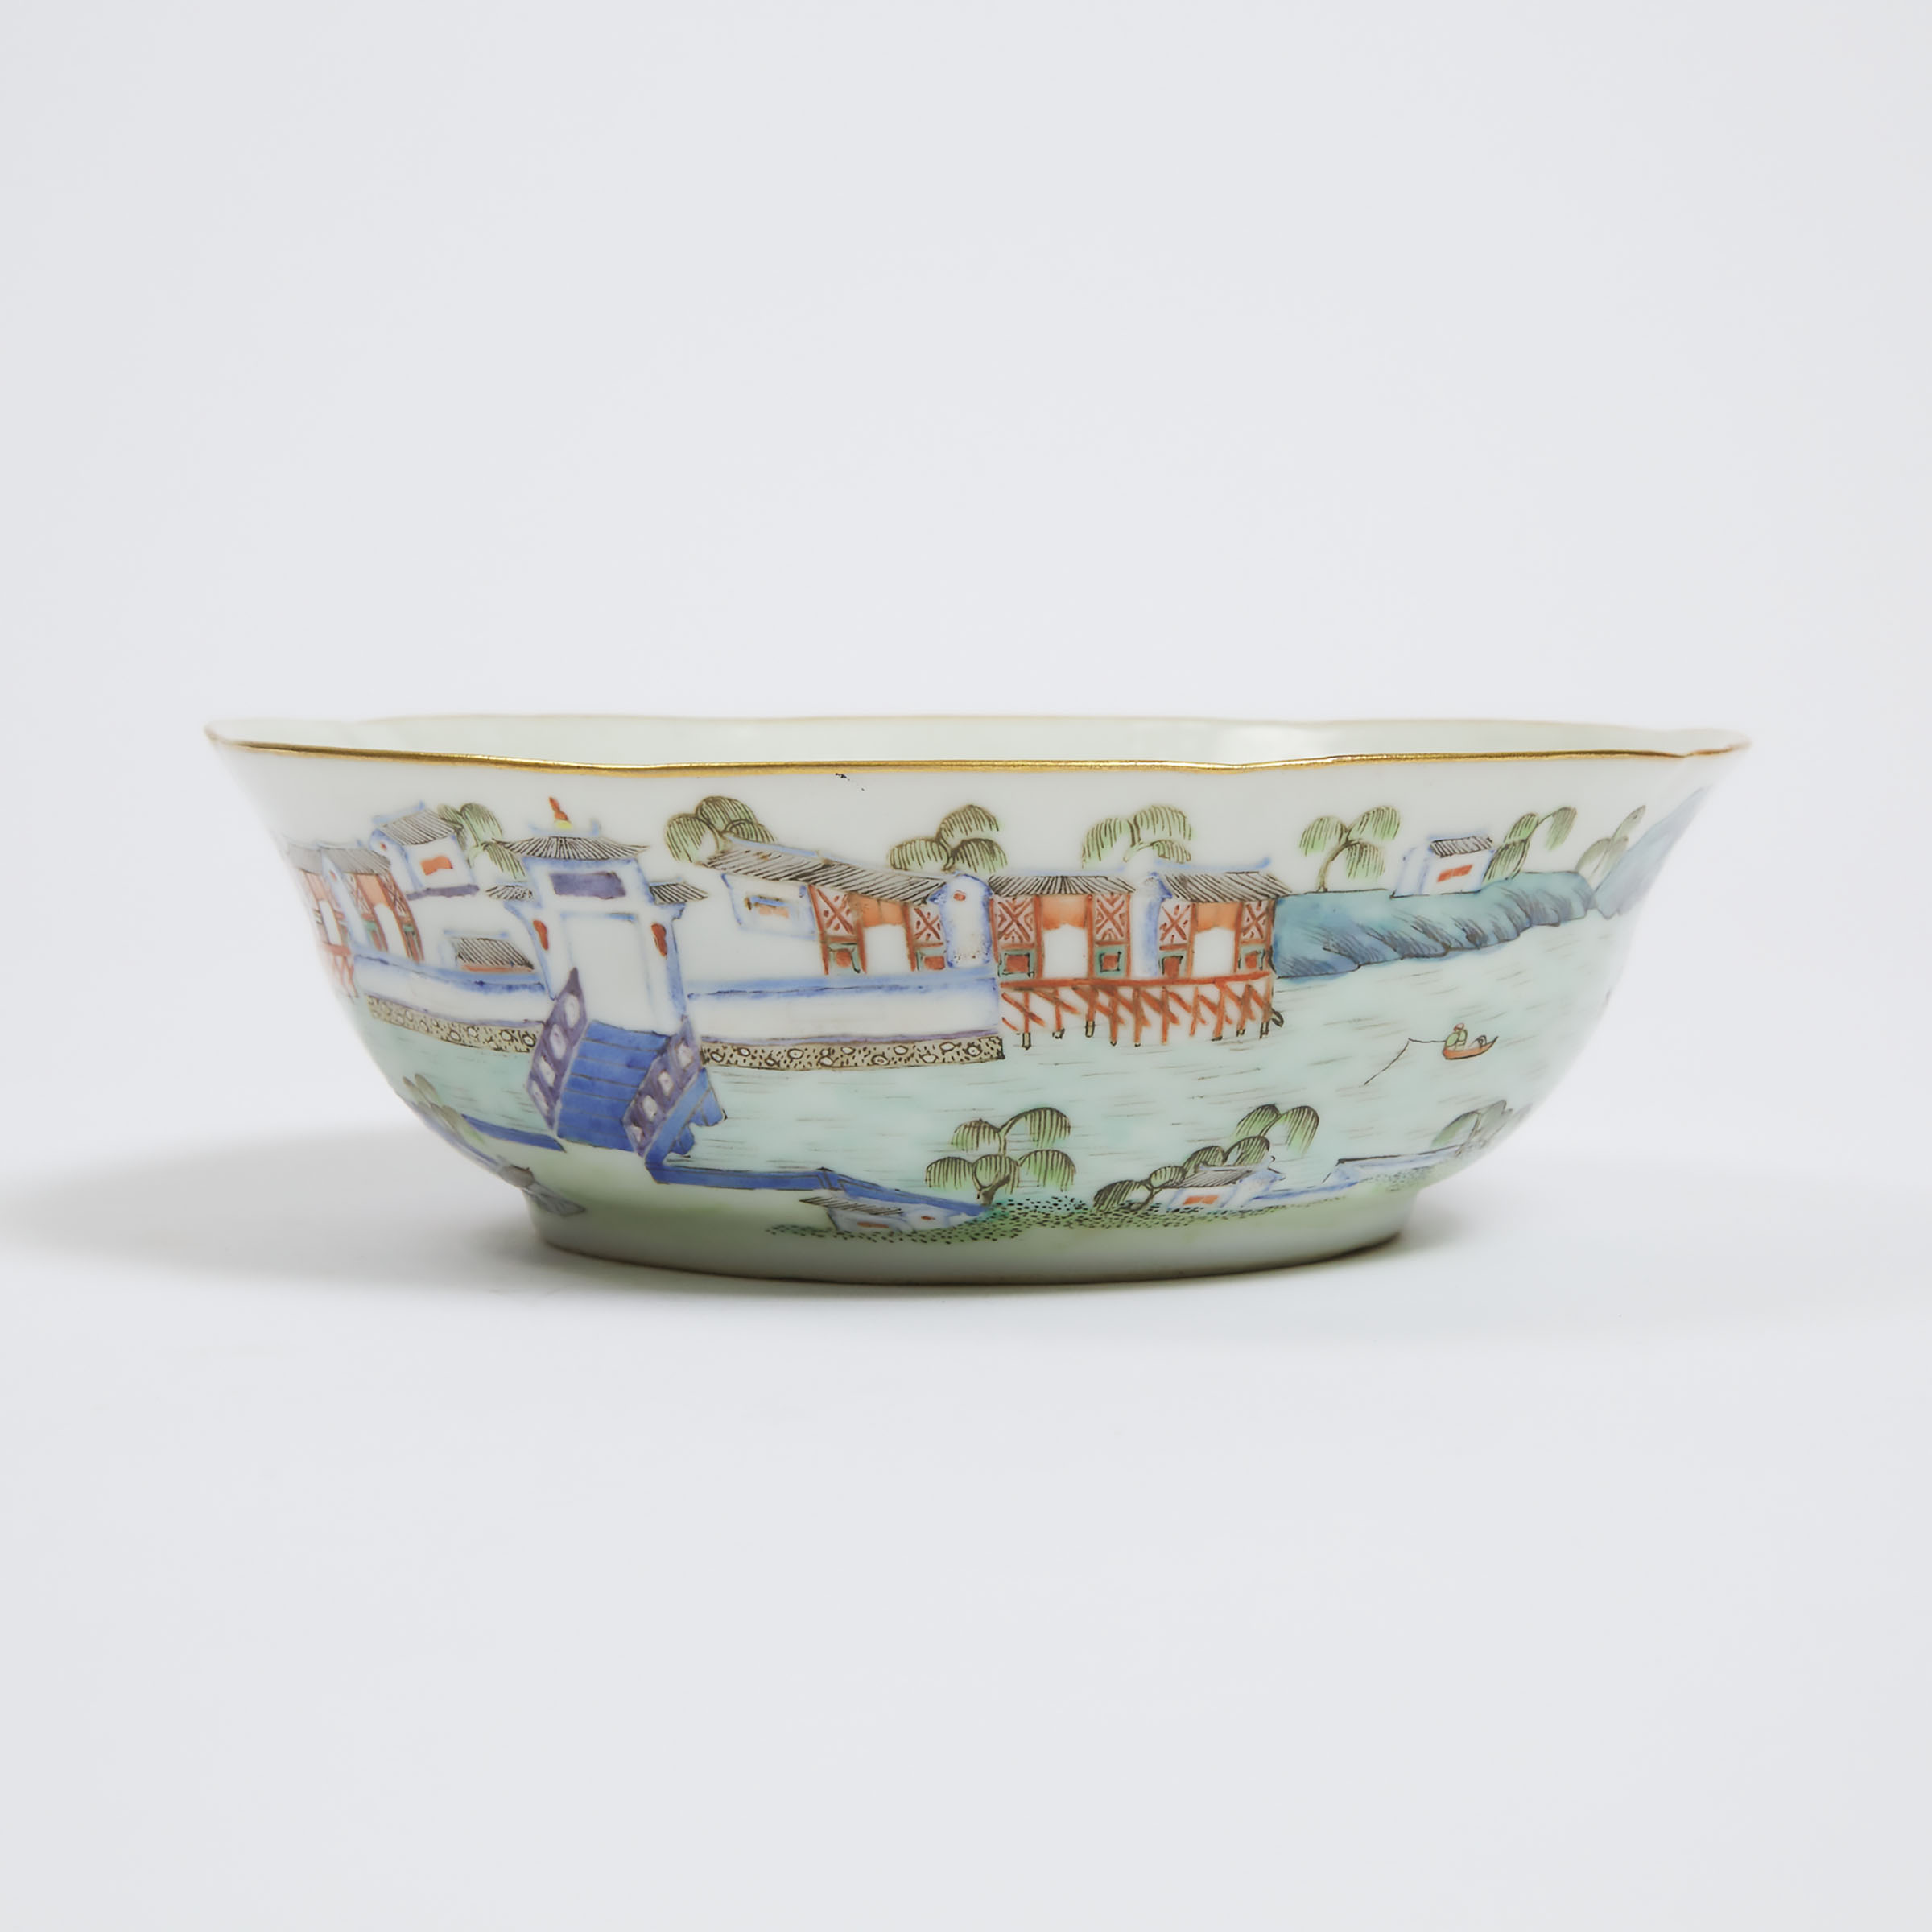 A Famille Rose 'Landscape' Shallow Bowl, Huazhou Chunxiao Mark, Early Republican Period